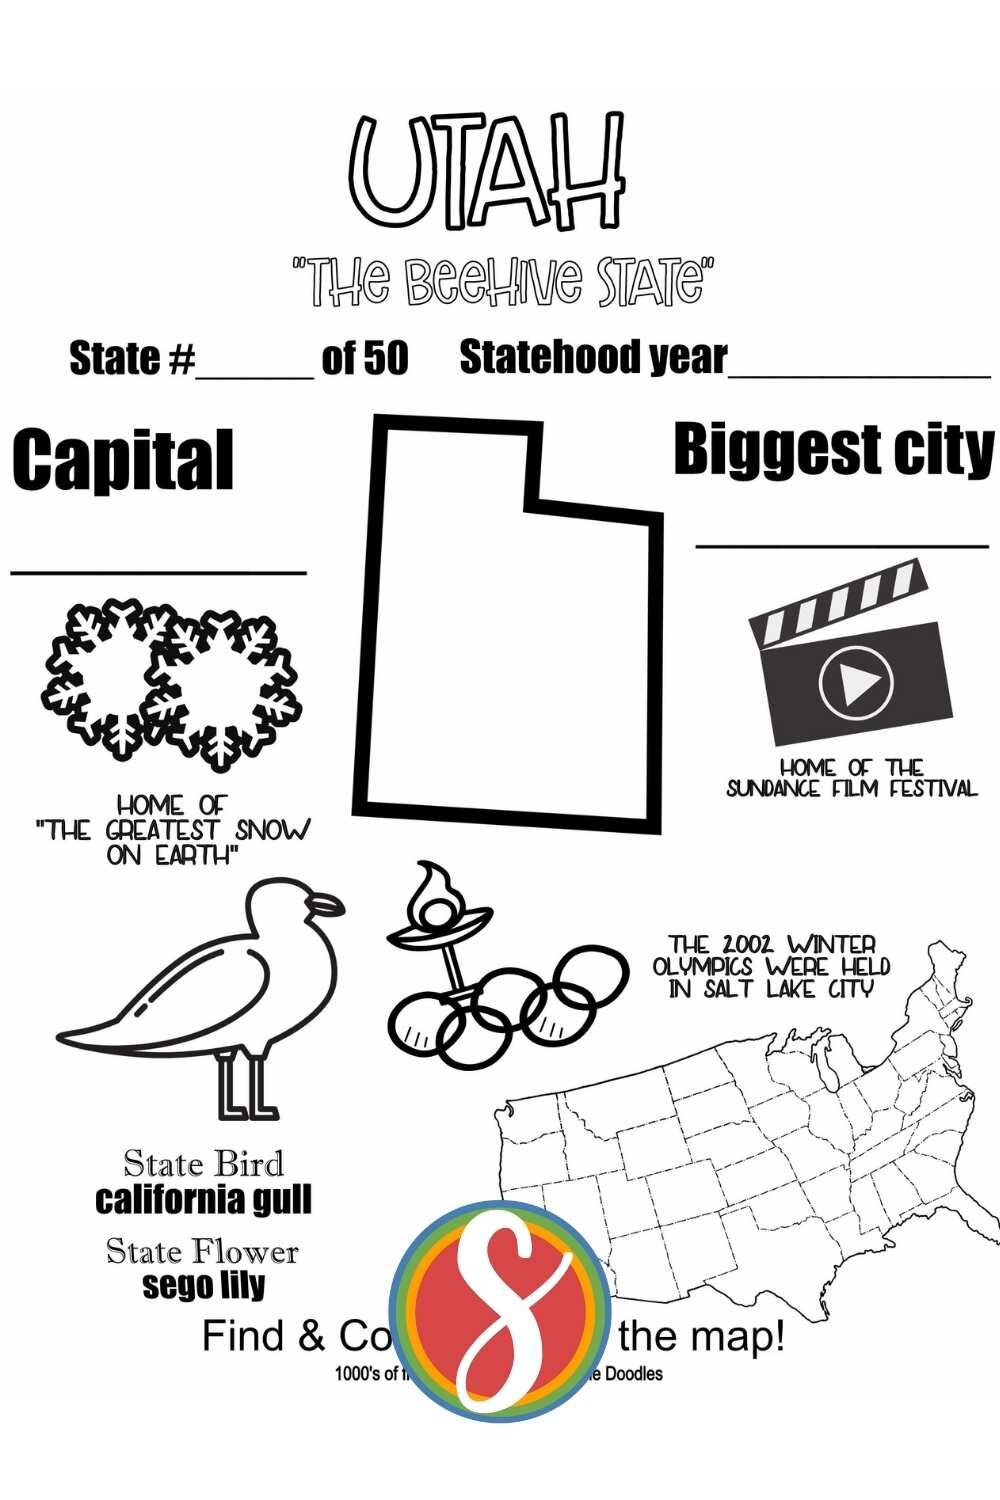 Utah  facts - a free activity coloring page about Utah from Stevie Doodles, free to print and color. Find 1000’s of free printable coloring sheets of all kinds at Stevie Doodles